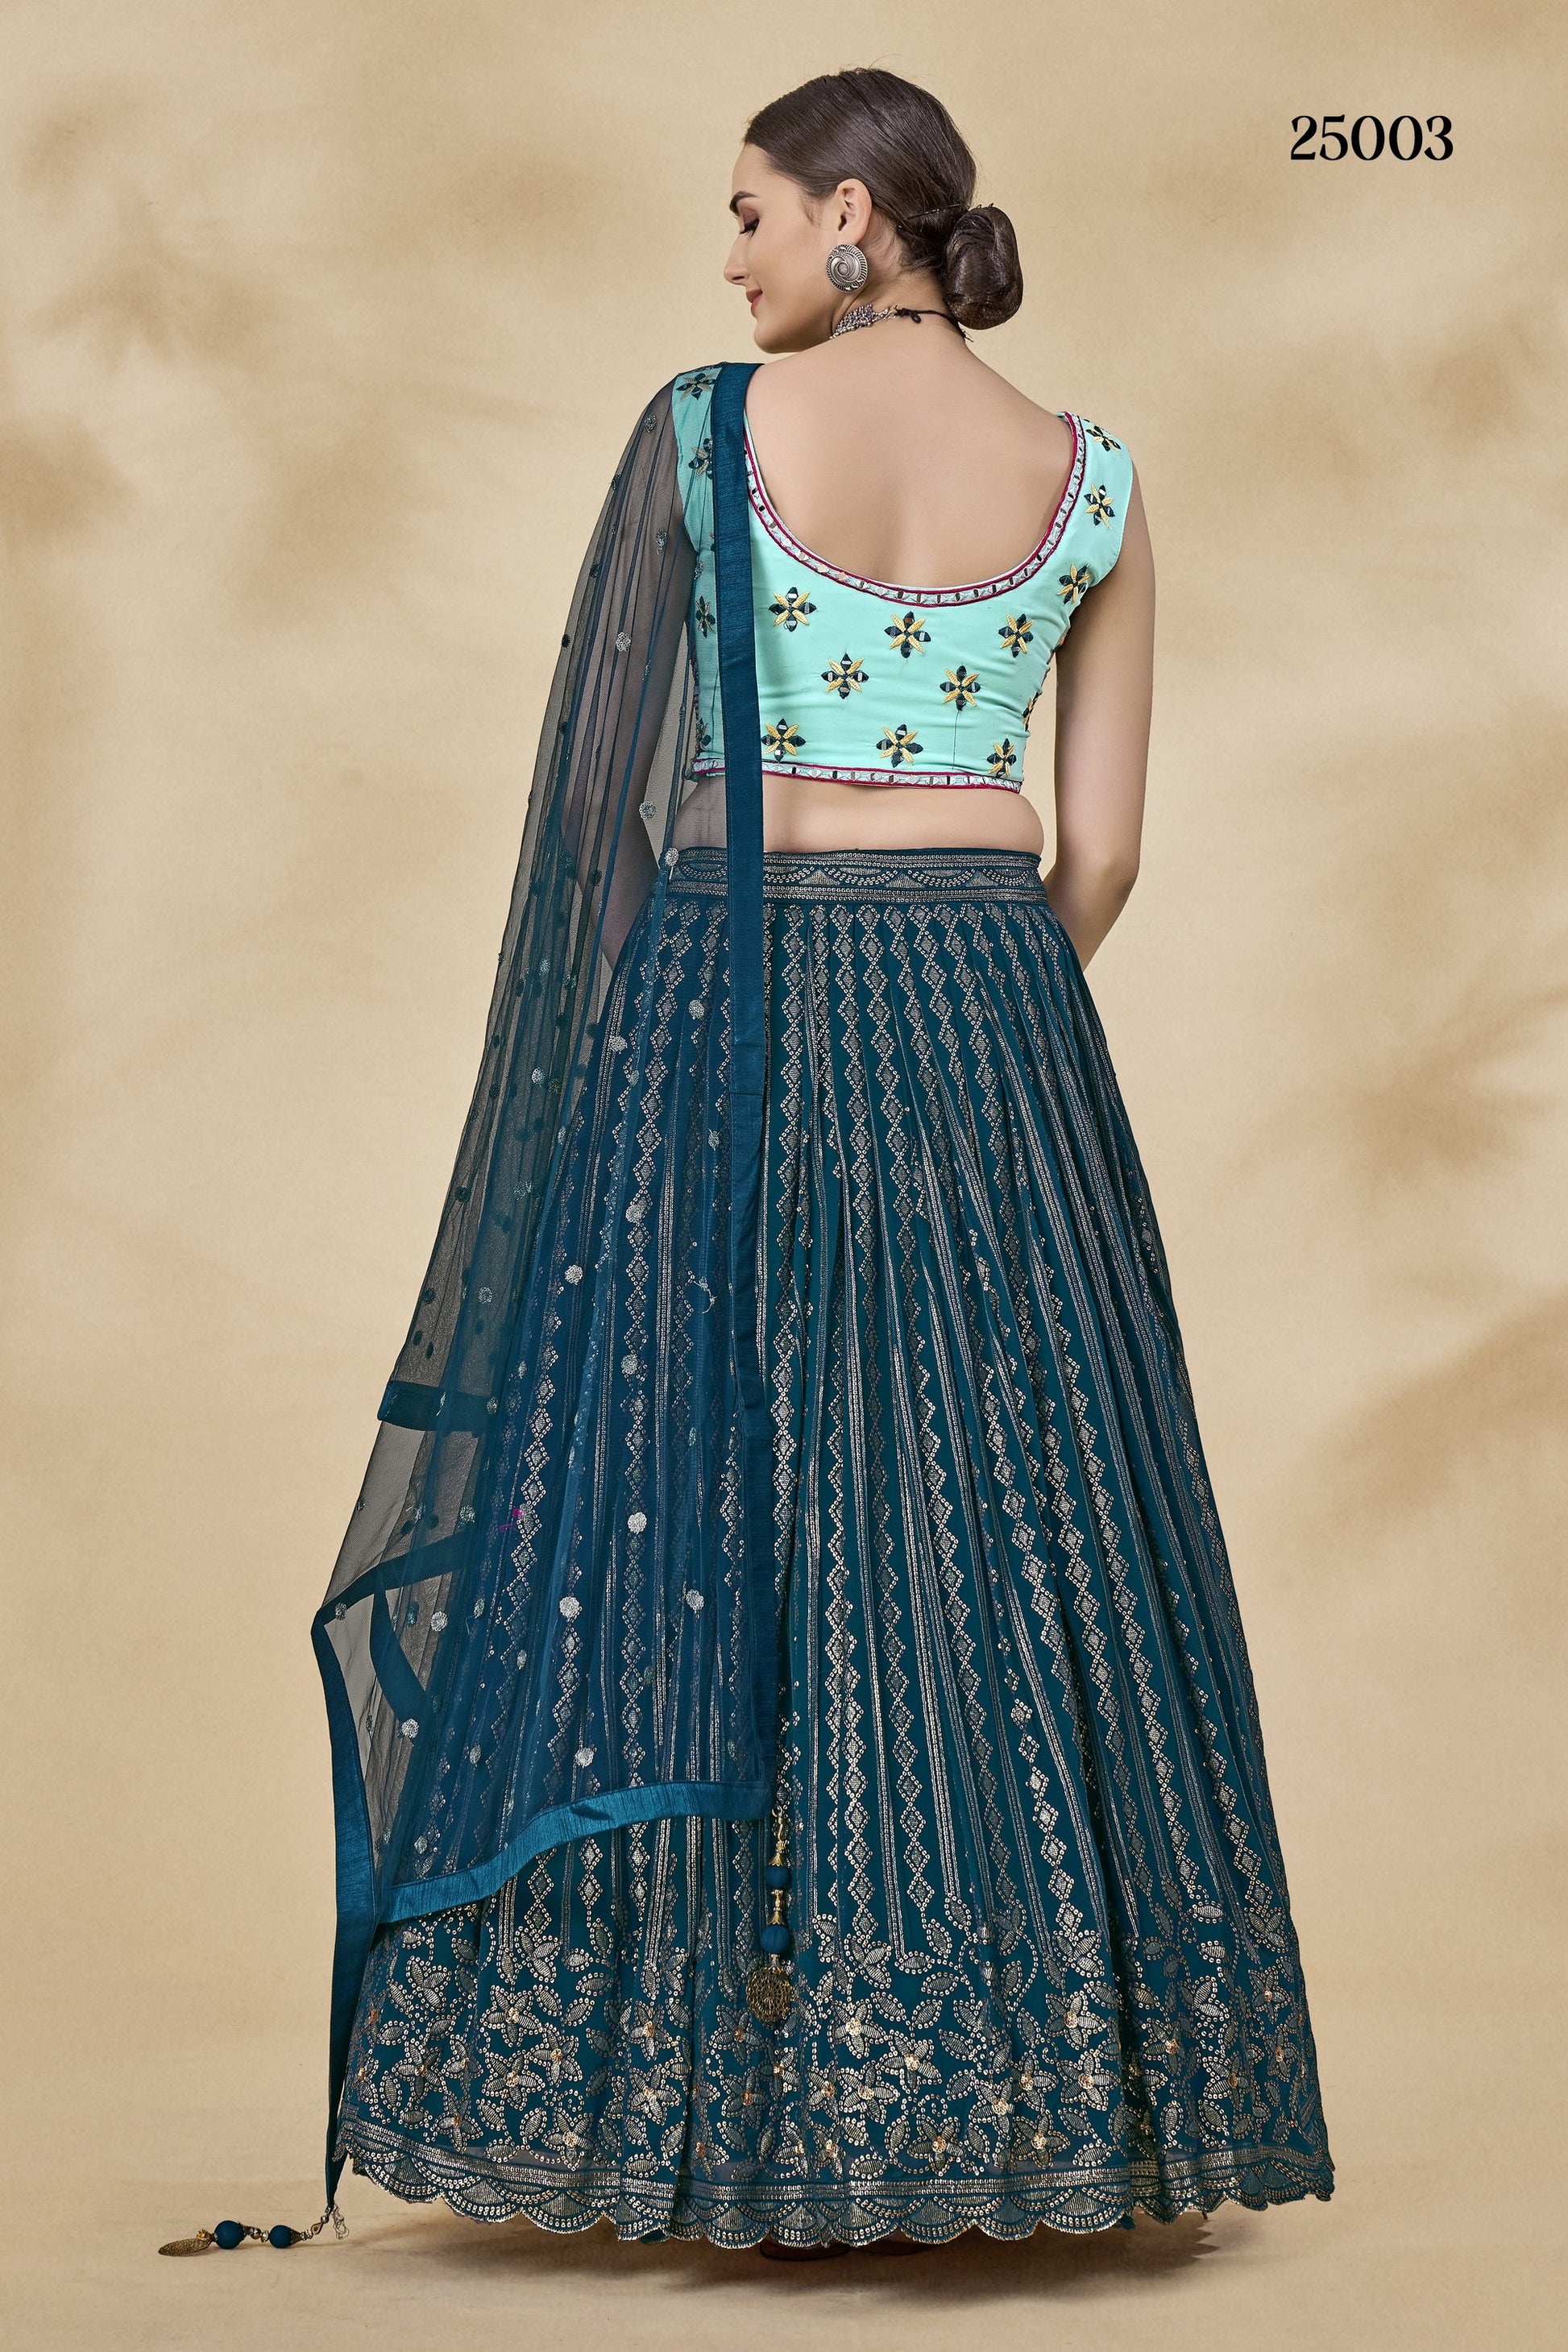 Teal Pakistani Georgette Lehenga Choli For Indian Festivals & Weddings - Sequence Embroidery Work, Thread Embroidery Work, Mirror Work